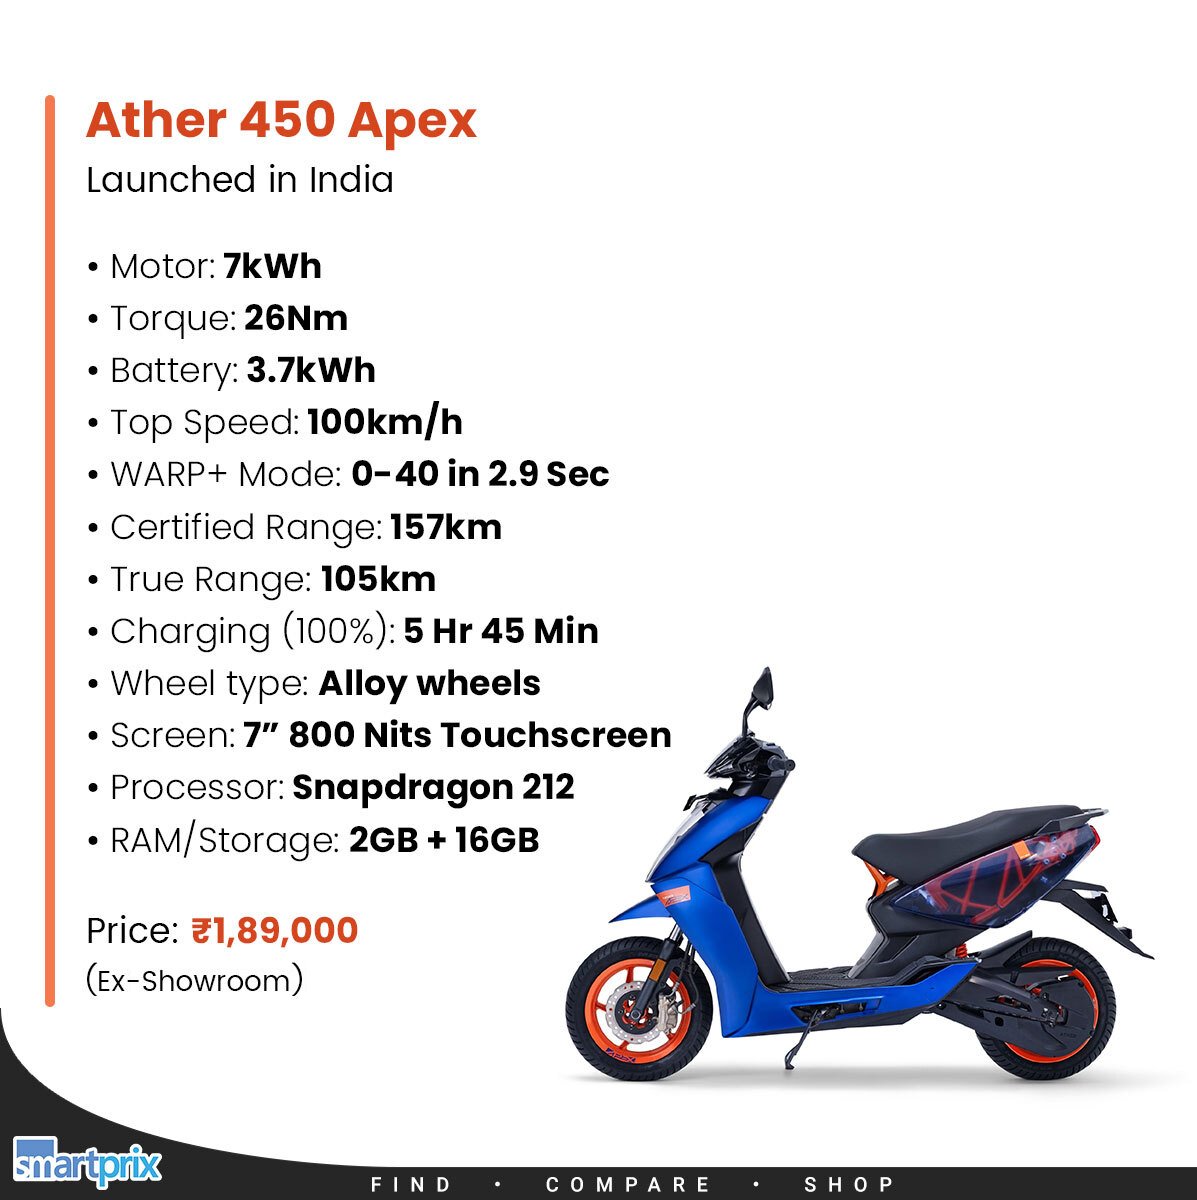 Ather 450 Apex electric scooter launched in India with Magic Twist Braking System

#Ather #Ather450Apex #ElectricVehicles #EV